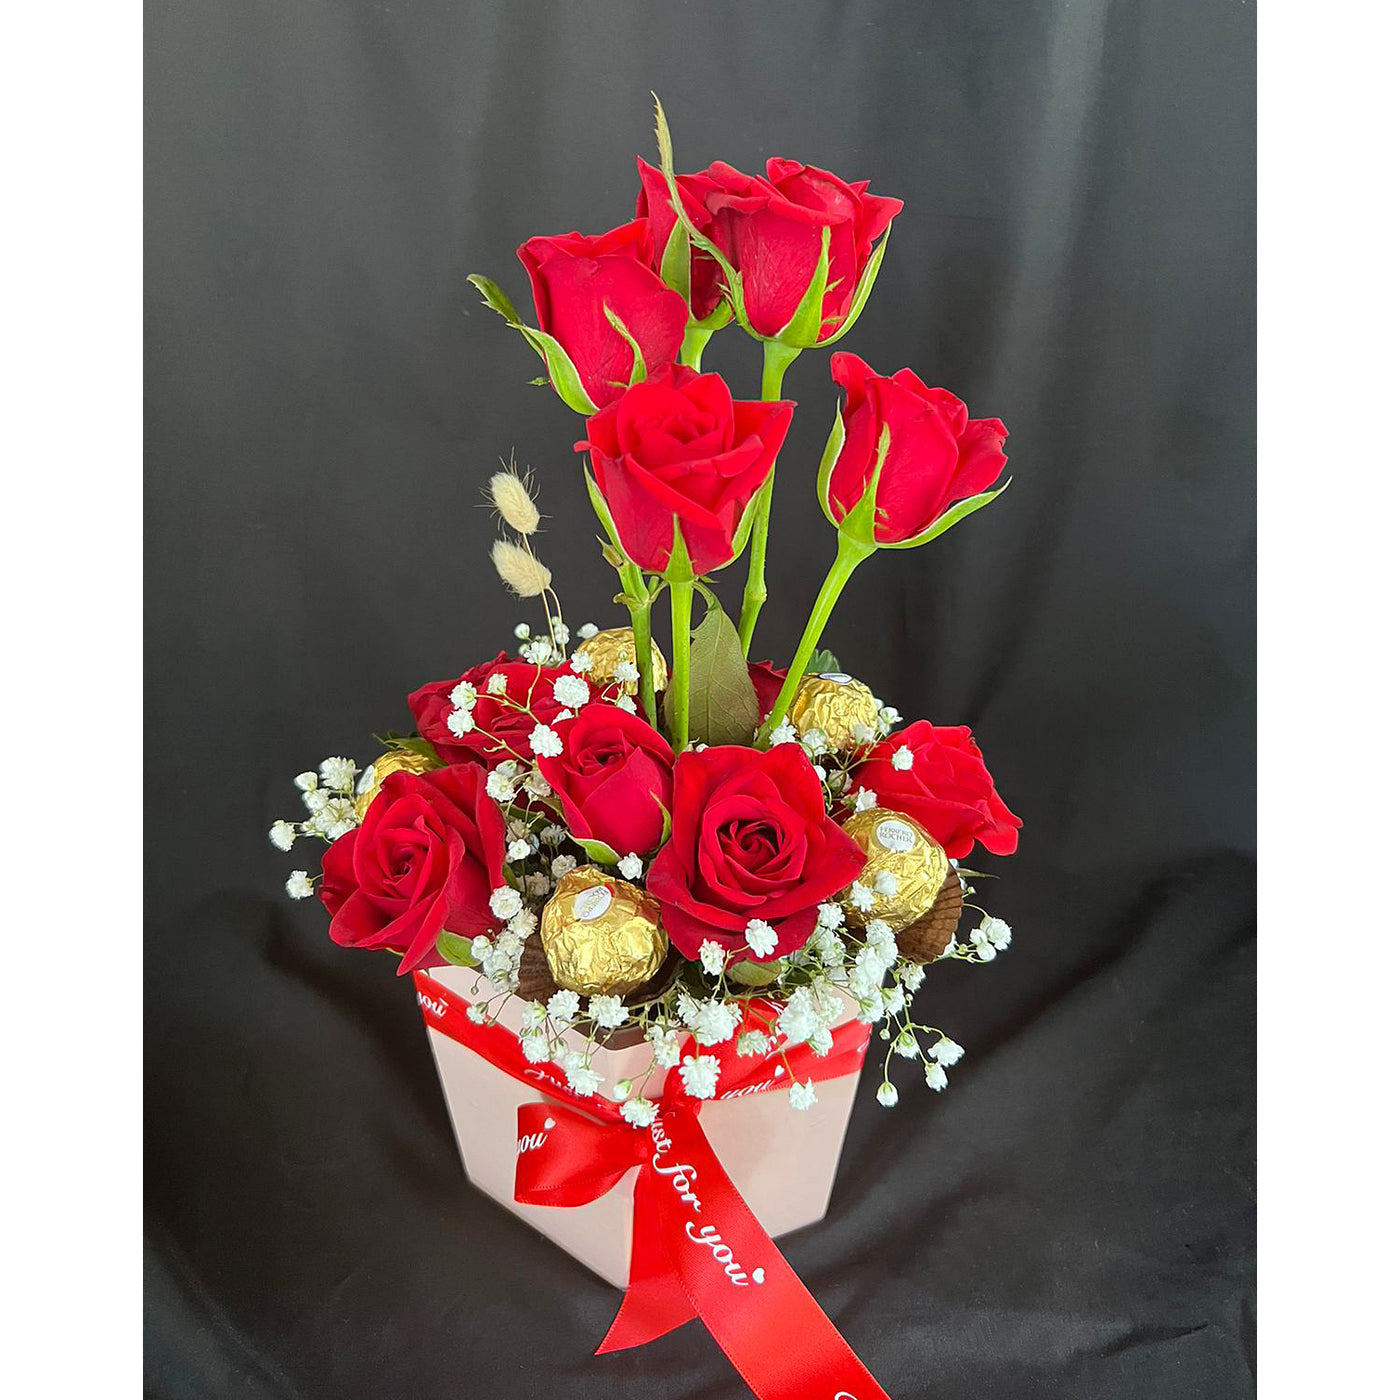 Just-for-You-Roses-Chocolates-DodoMarket-Delivery-Mauritius